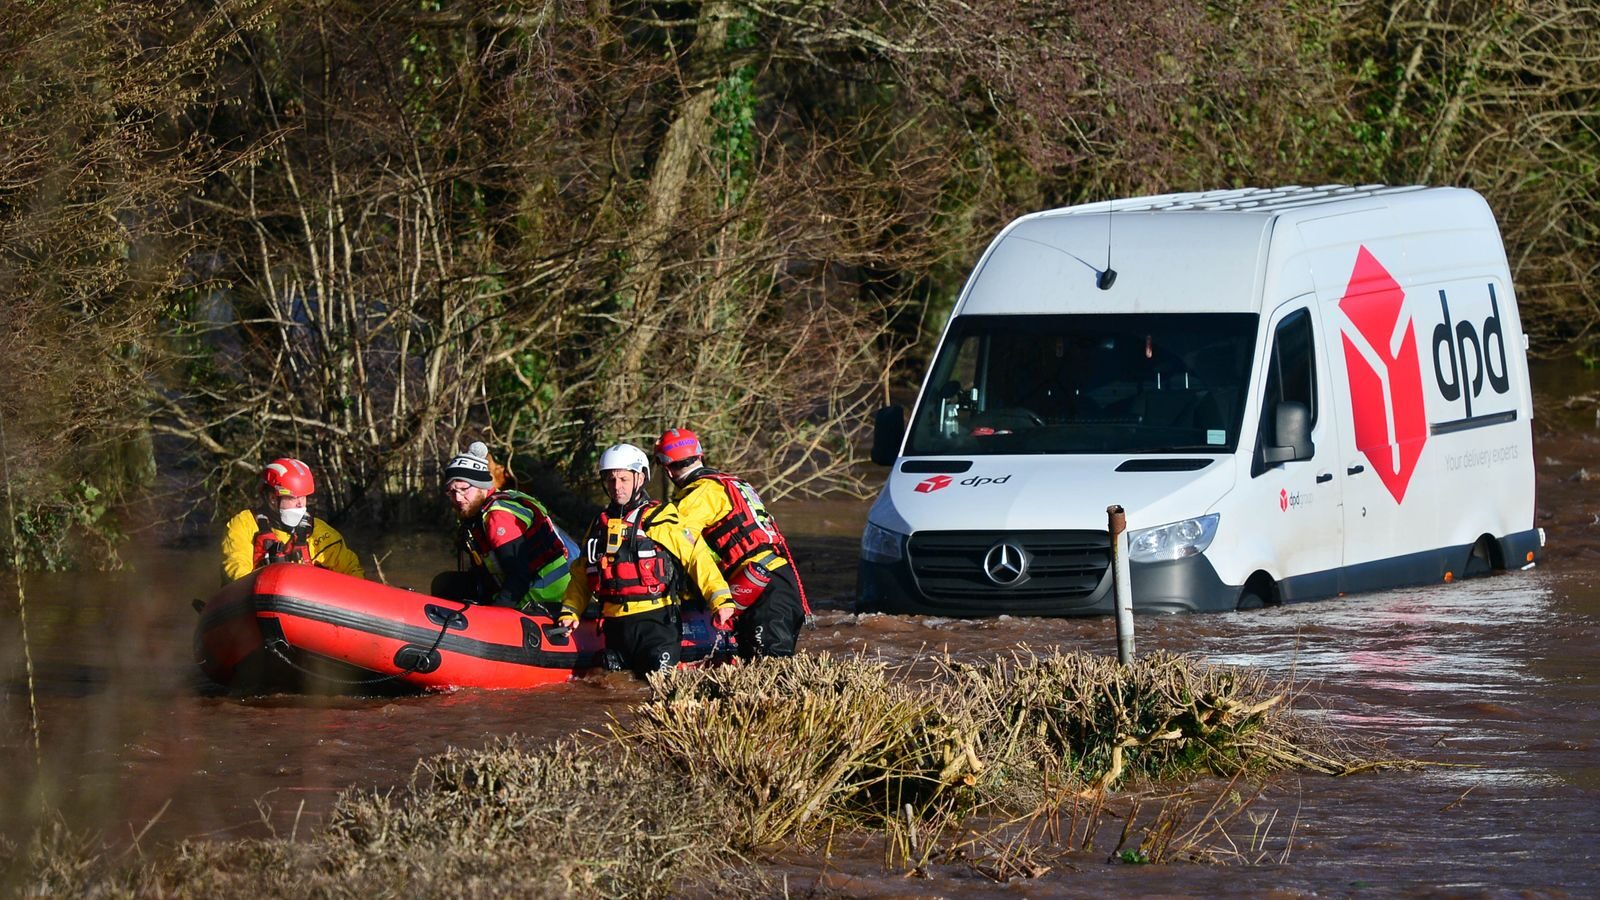 Emergency services rescued a delivery van driver stranded in flood water in Newbridge on Usk, Wales